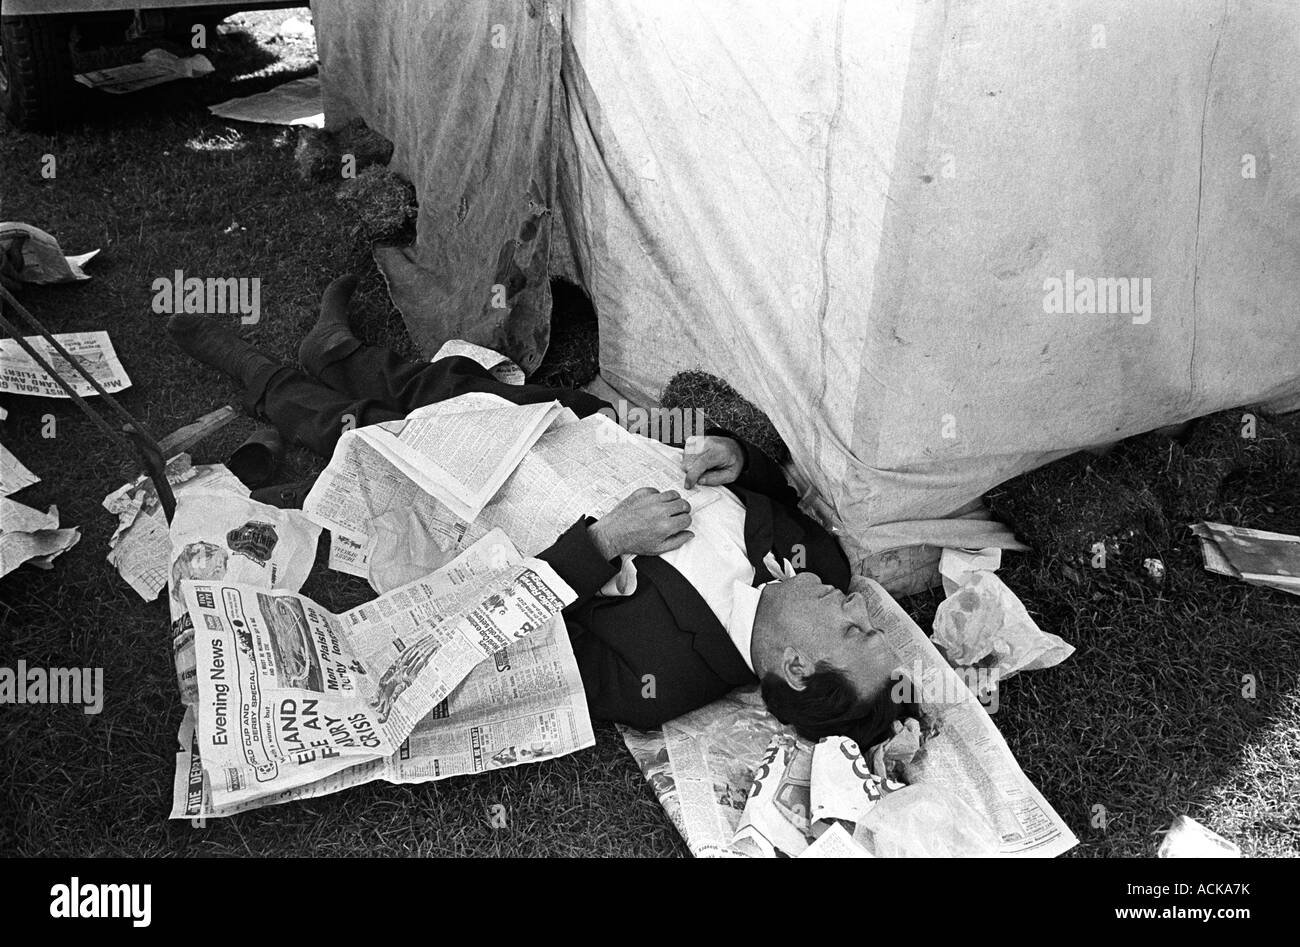 Drunk man 1970s  UK. Too much to drink sleeping it off, he's been binge drinking. The Derby Horse Race, Epsom Downs Surrey England 1970. HOMER SYKES Stock Photo